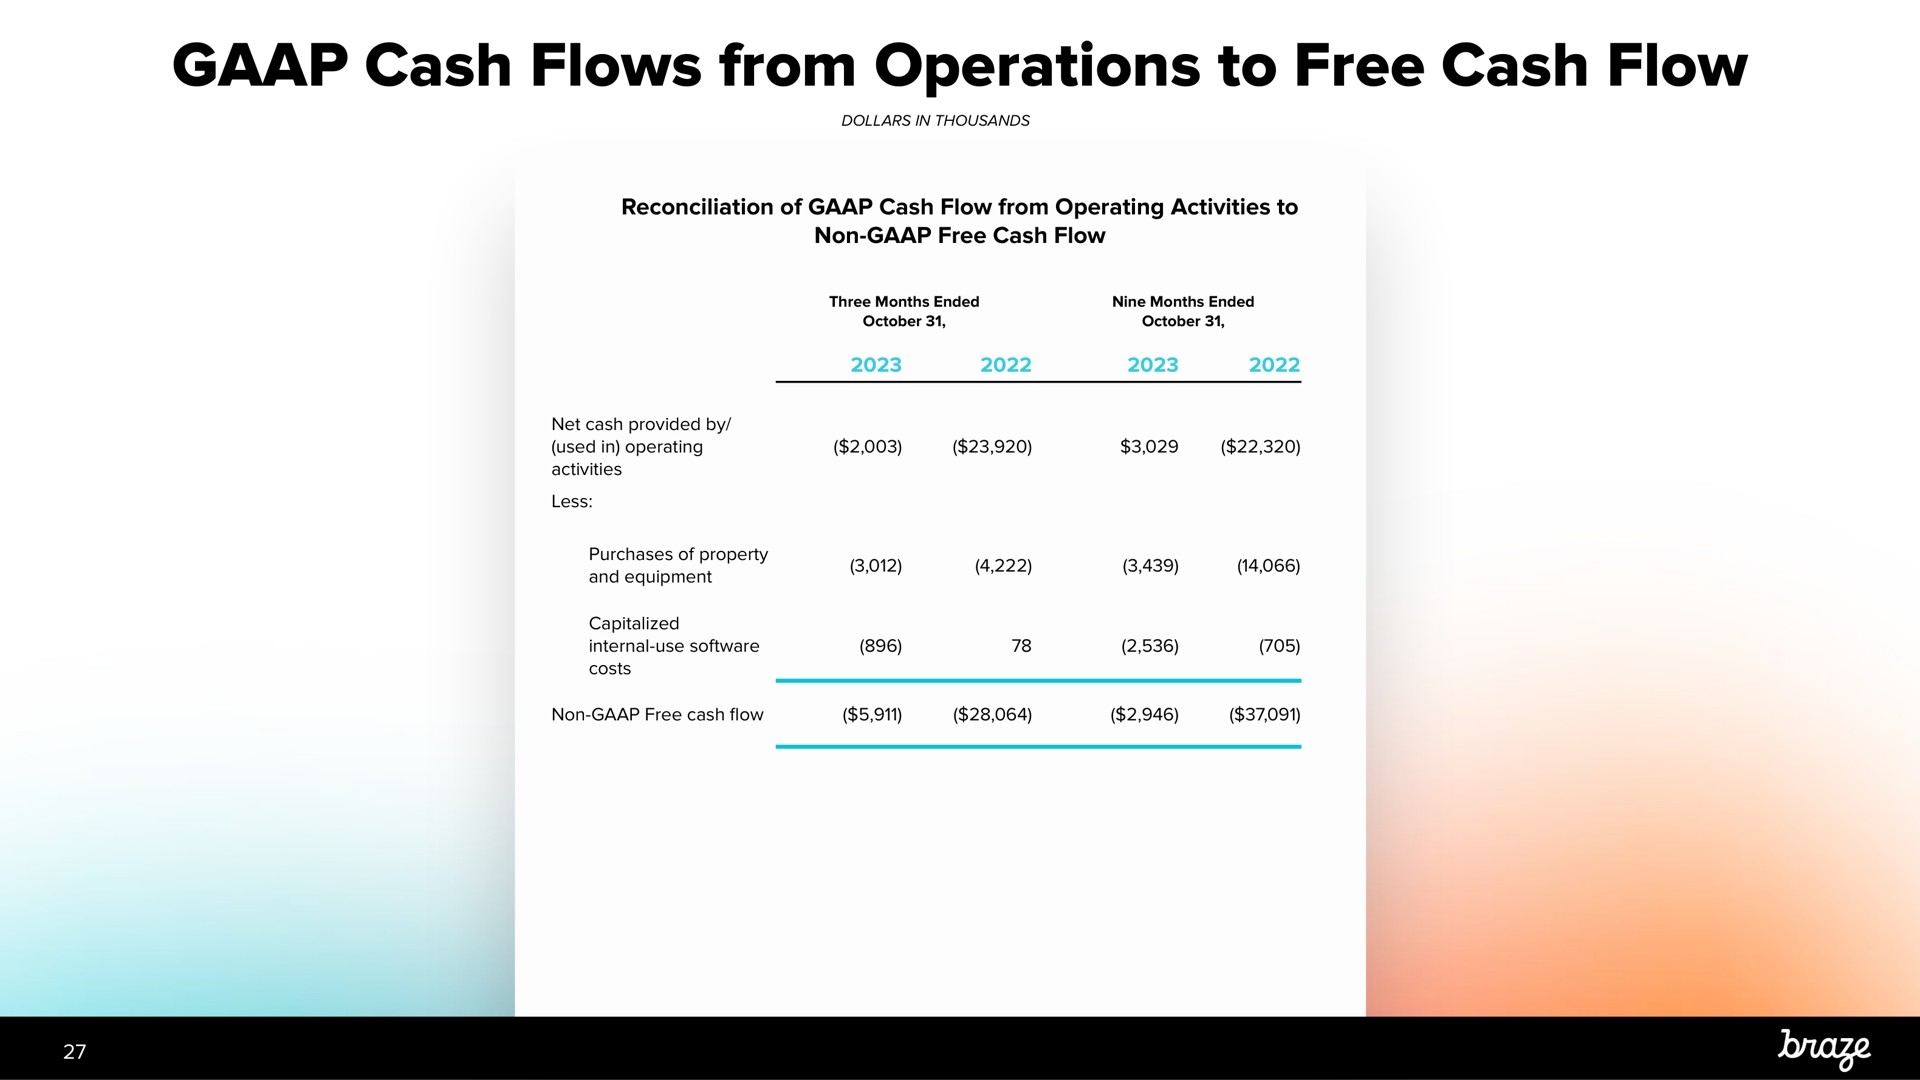 cash flows from operations to free cash flow | Braze